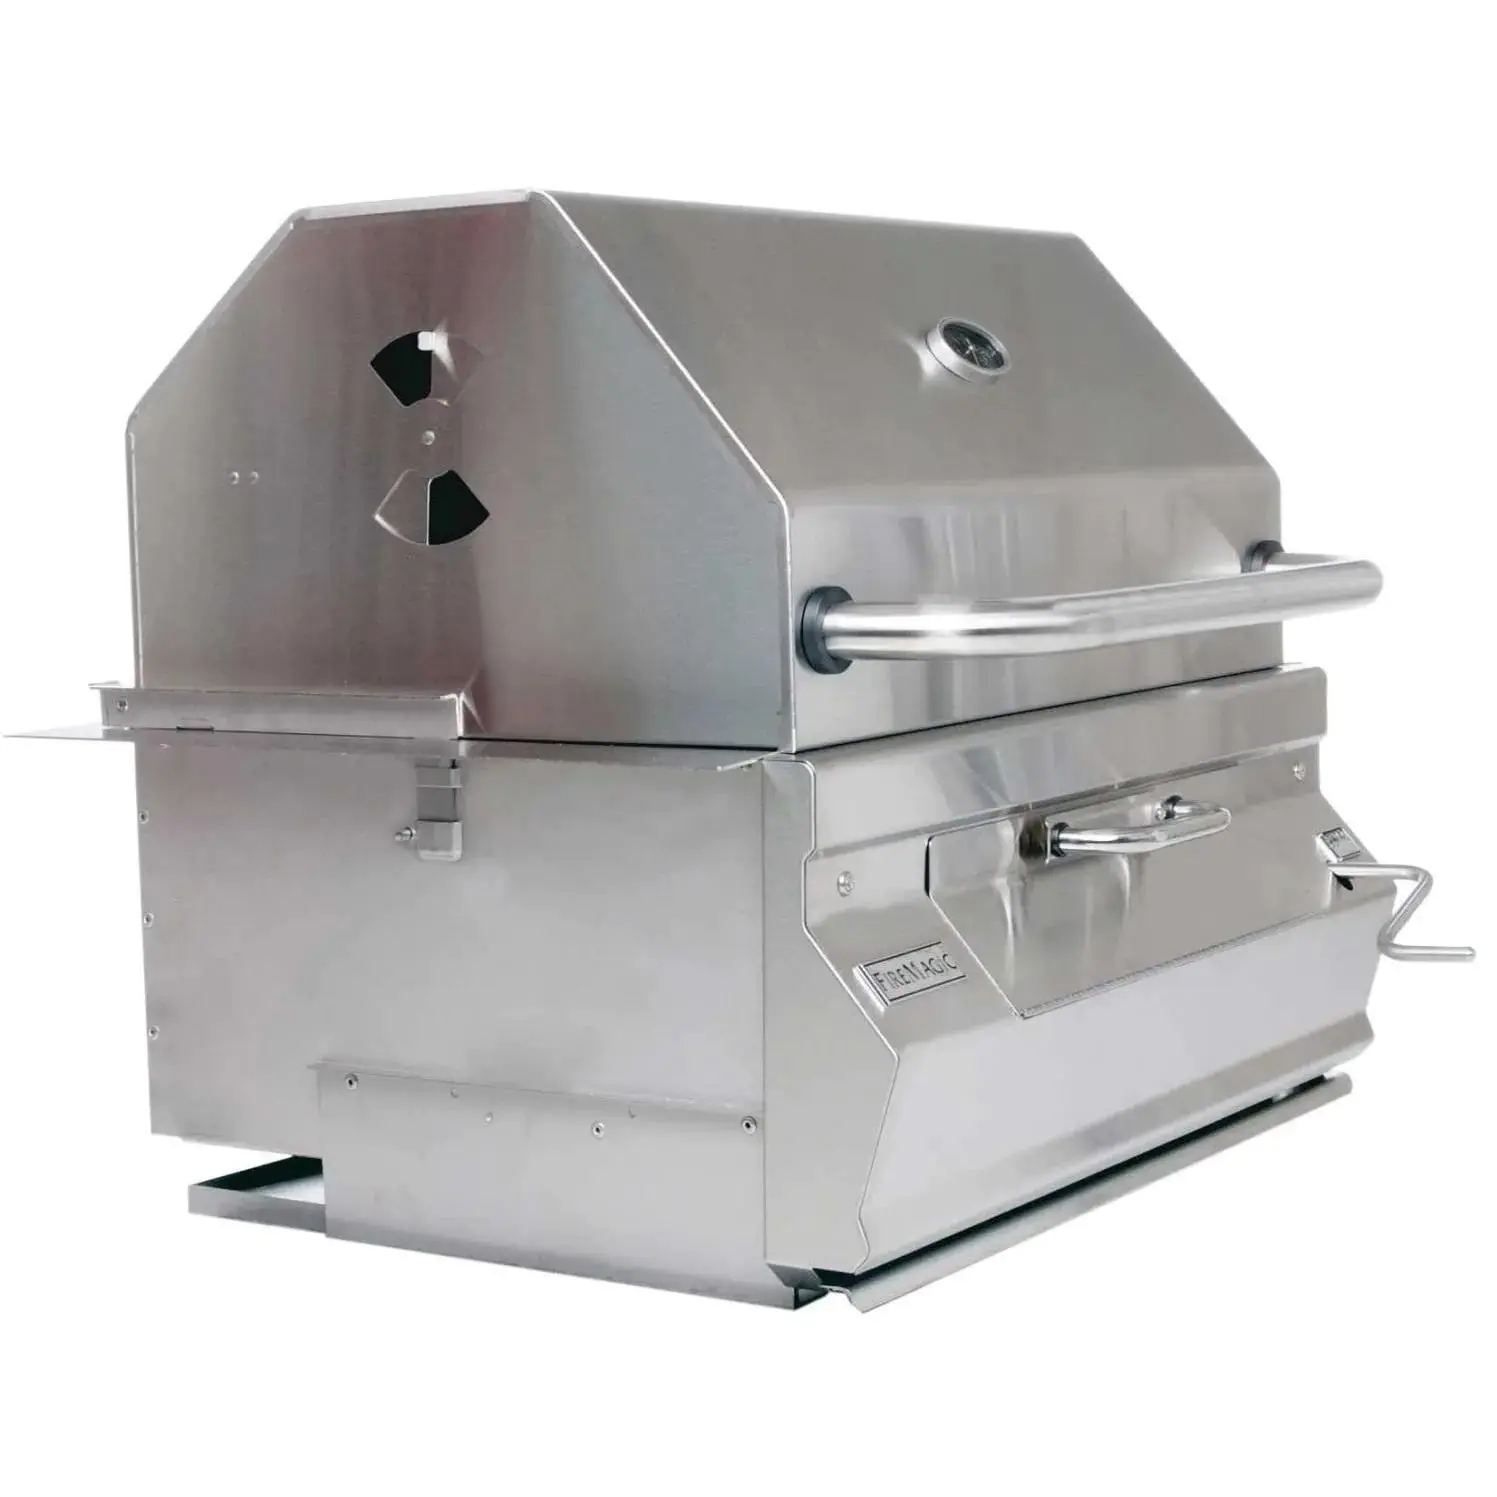 Fire Magic 24" Legacy Series Built-In Charcoal Grill in Stainless Steel Finish (12-SC01C-A)